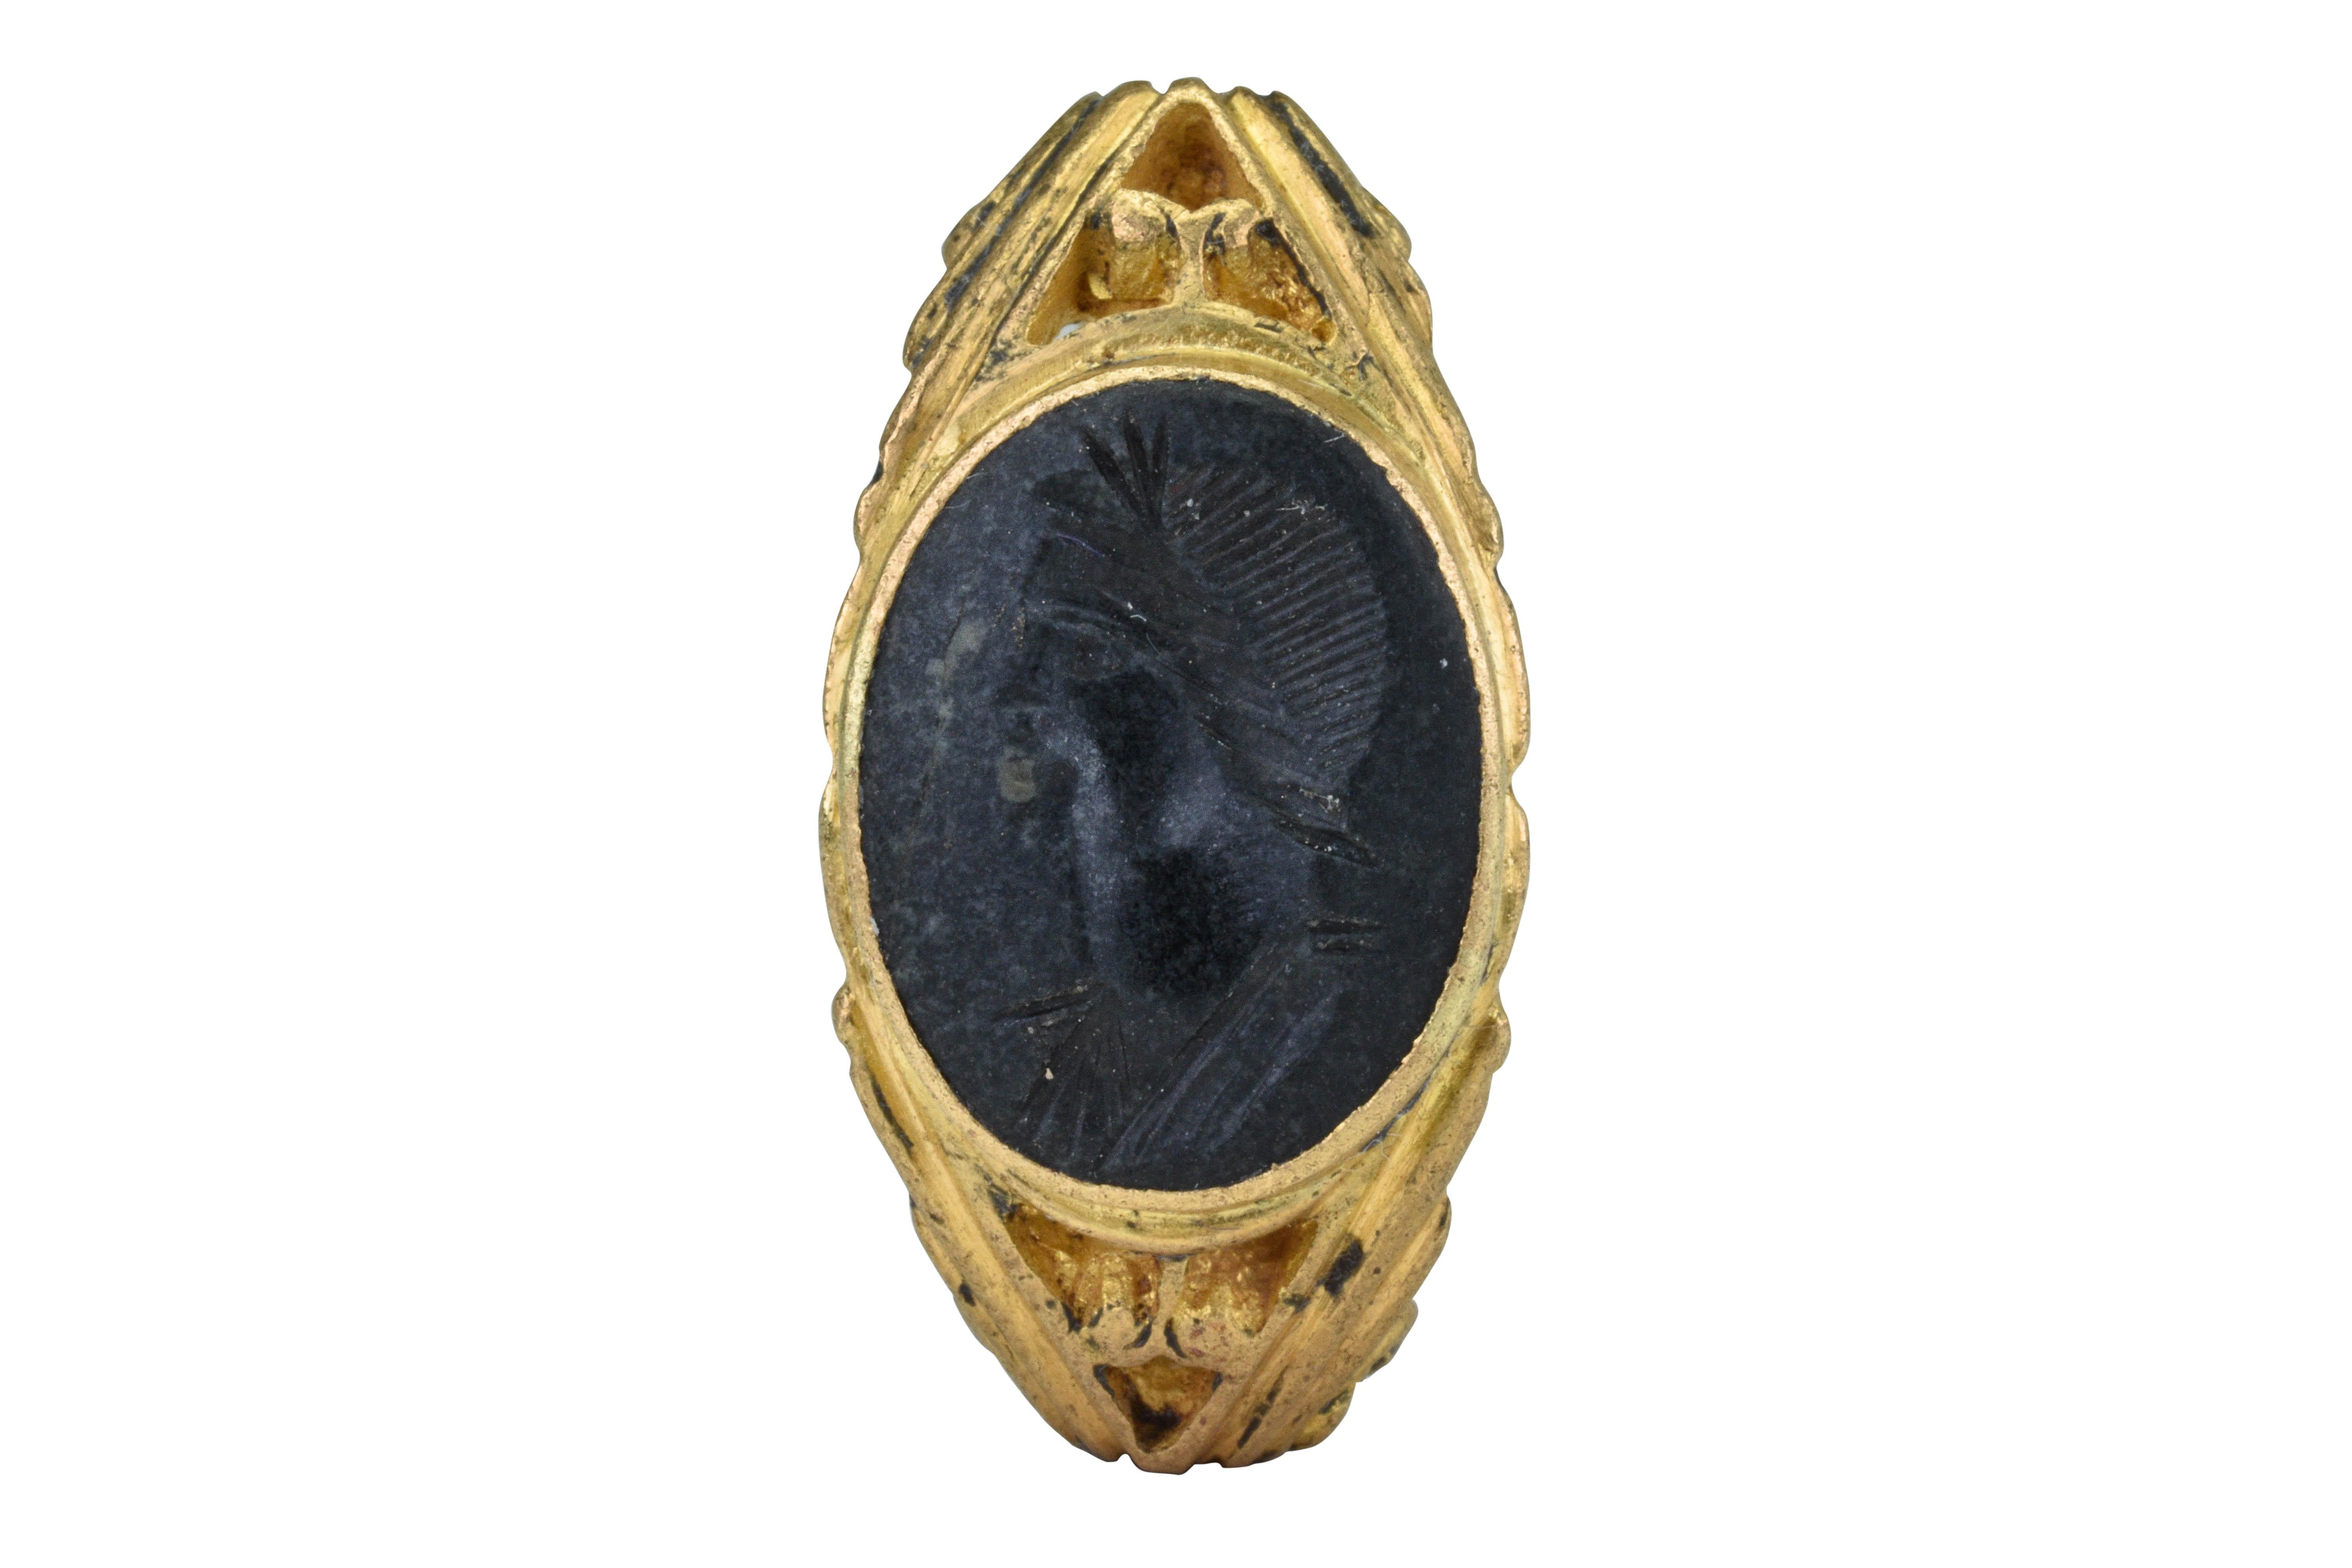 Ancient Roman Gold Portrait Intaglio Signet Ring

Ca. 100-300 AD

An Ancient Roman gold signet ring with a D-shaped hoop embellished with scrolling acanthus leaf ornamentation leading to expanded open-work shoulders with two pairs of opposed pelta